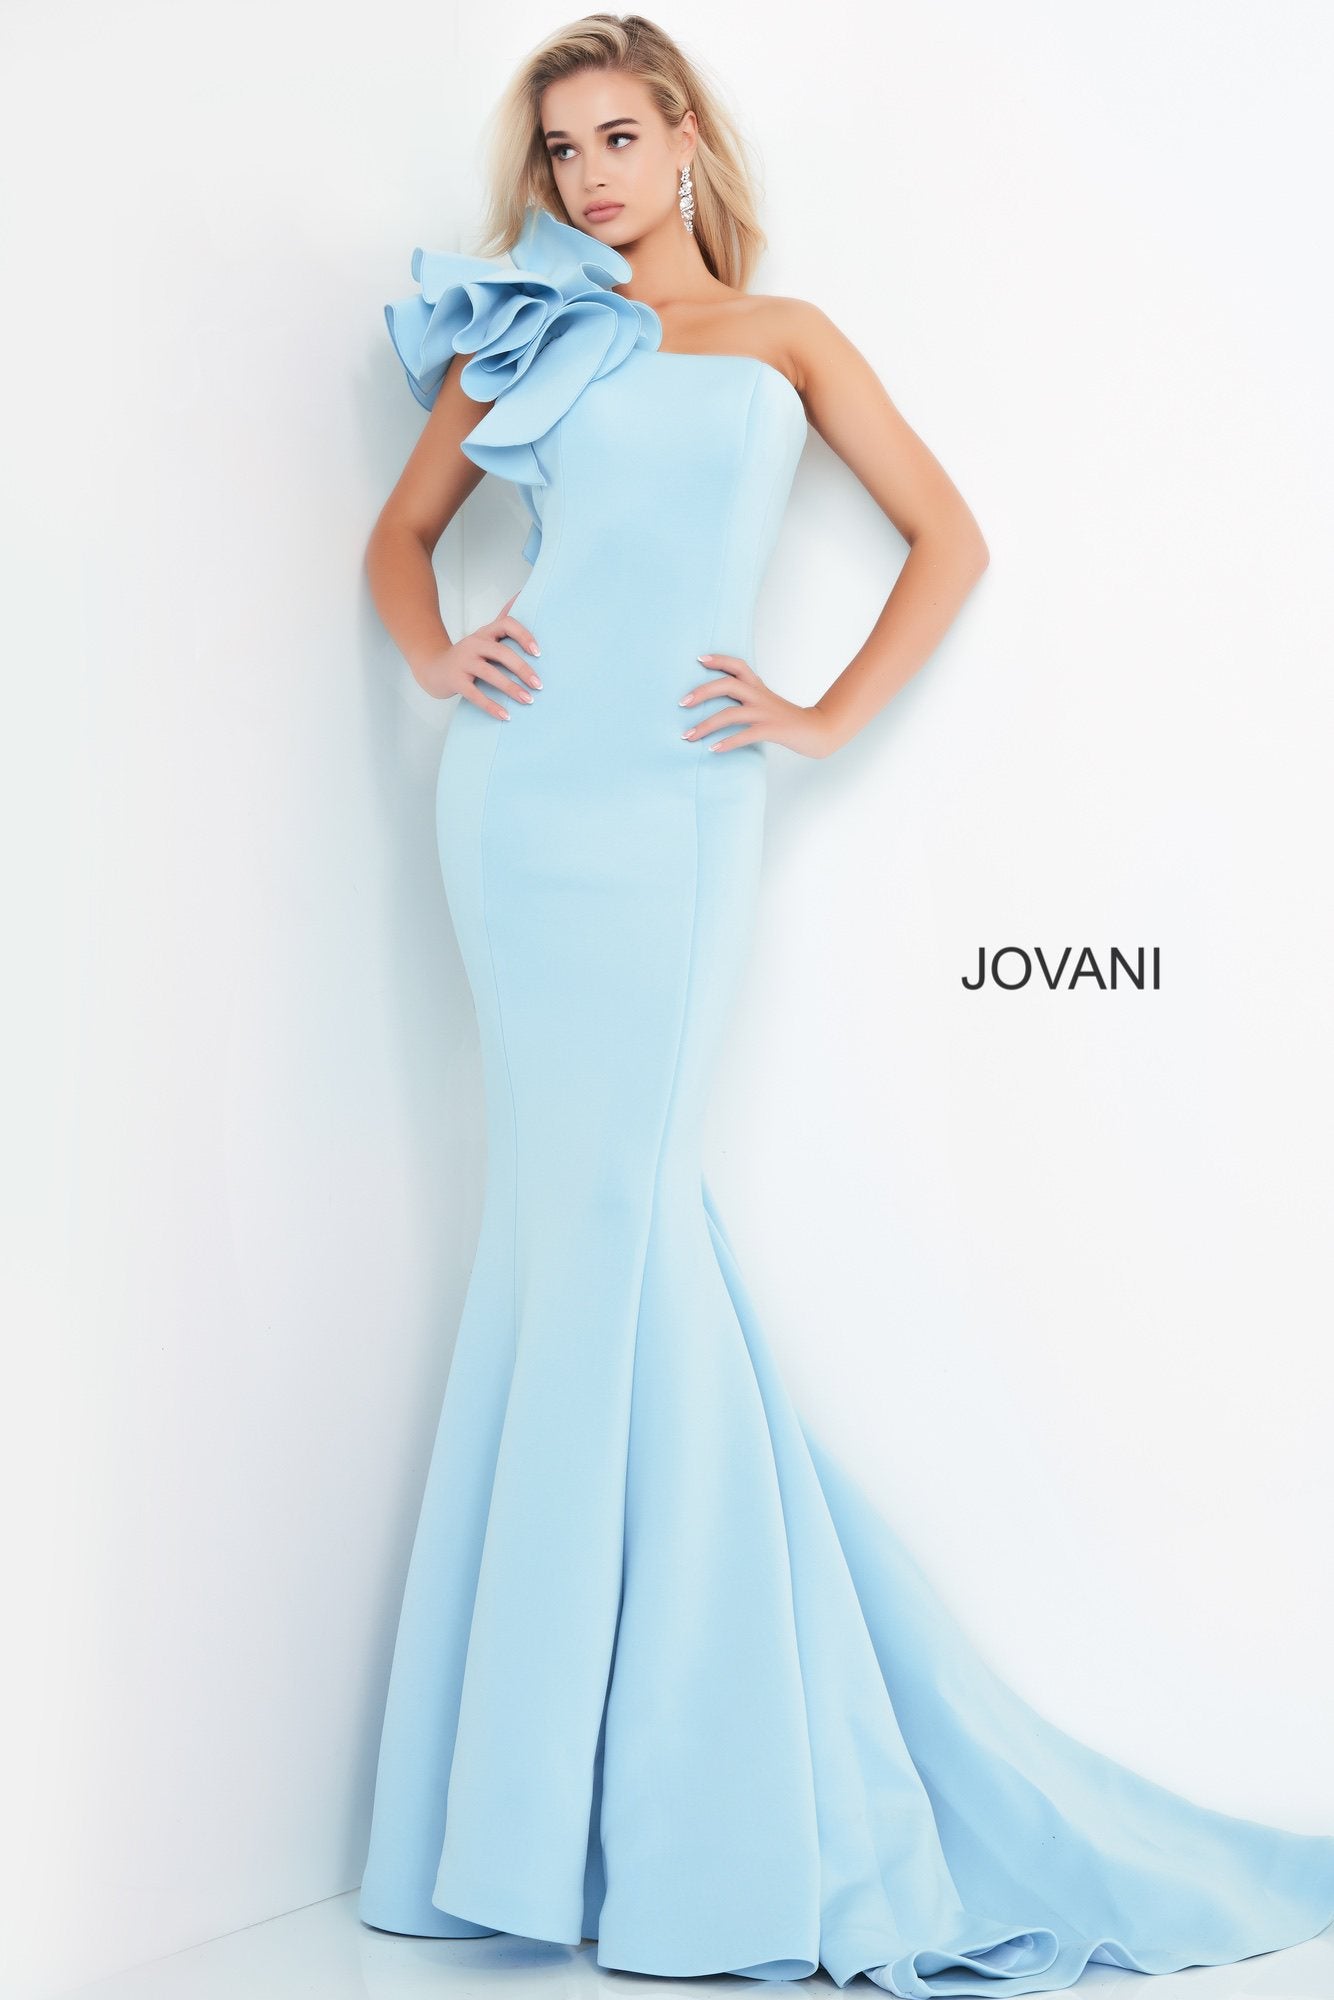 Jovani 63994 Fitted Mermaid One Shoulder Evening Gown Prom Dress Formal